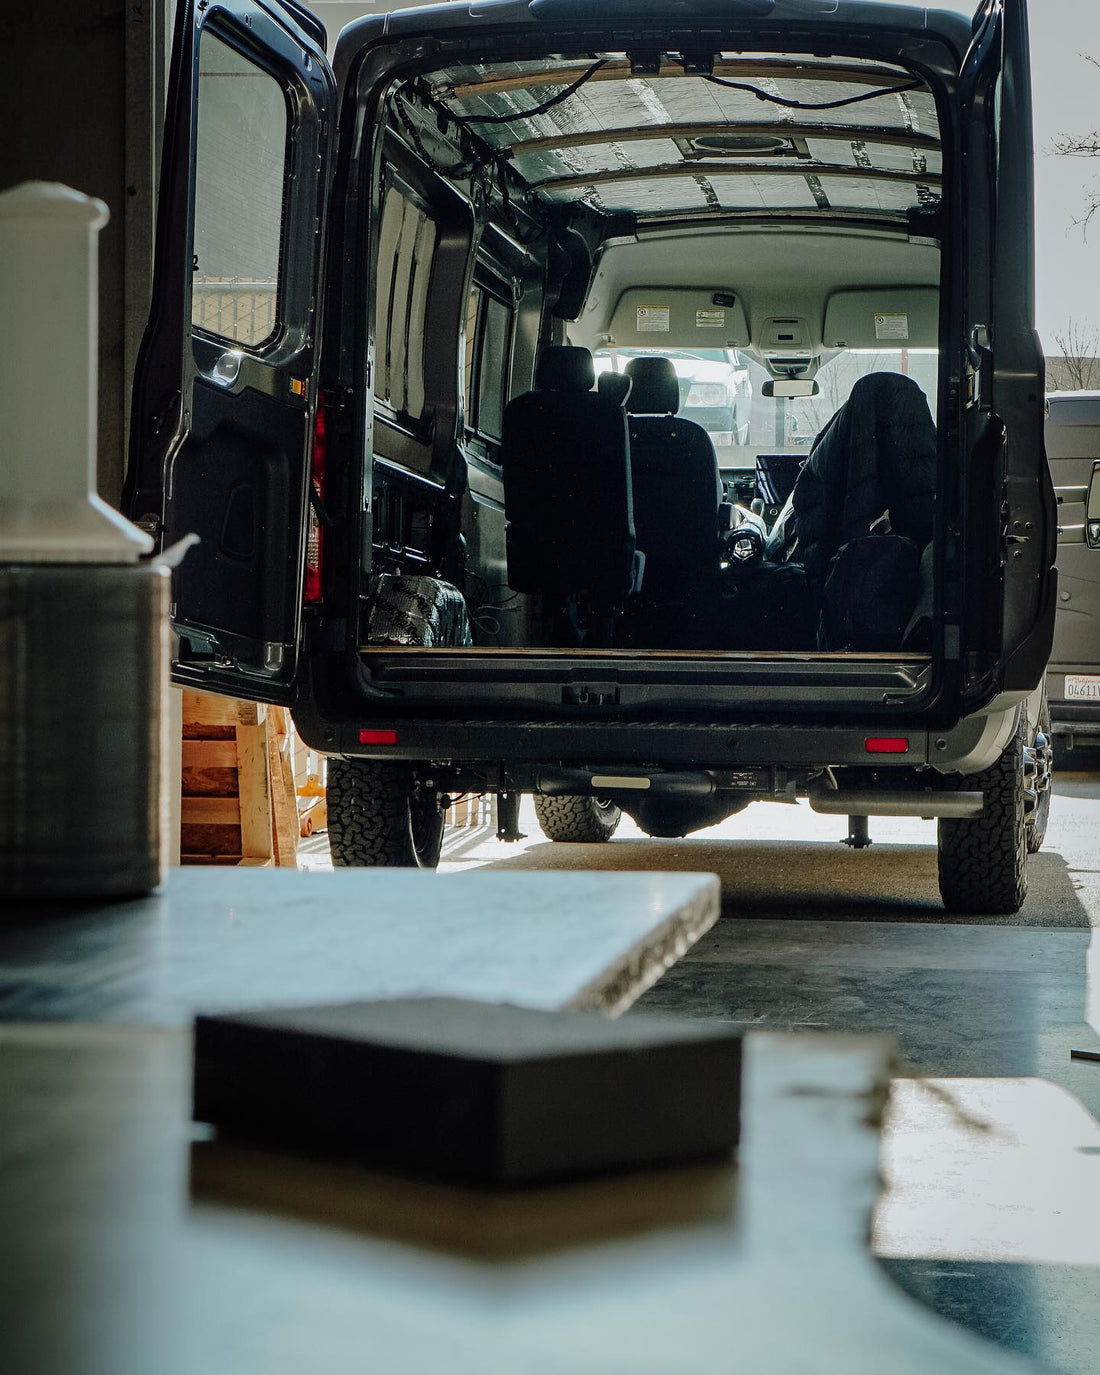 "Van Life Maintenance: Essential Tips for Keeping Your Mobile Home in Top Condition"